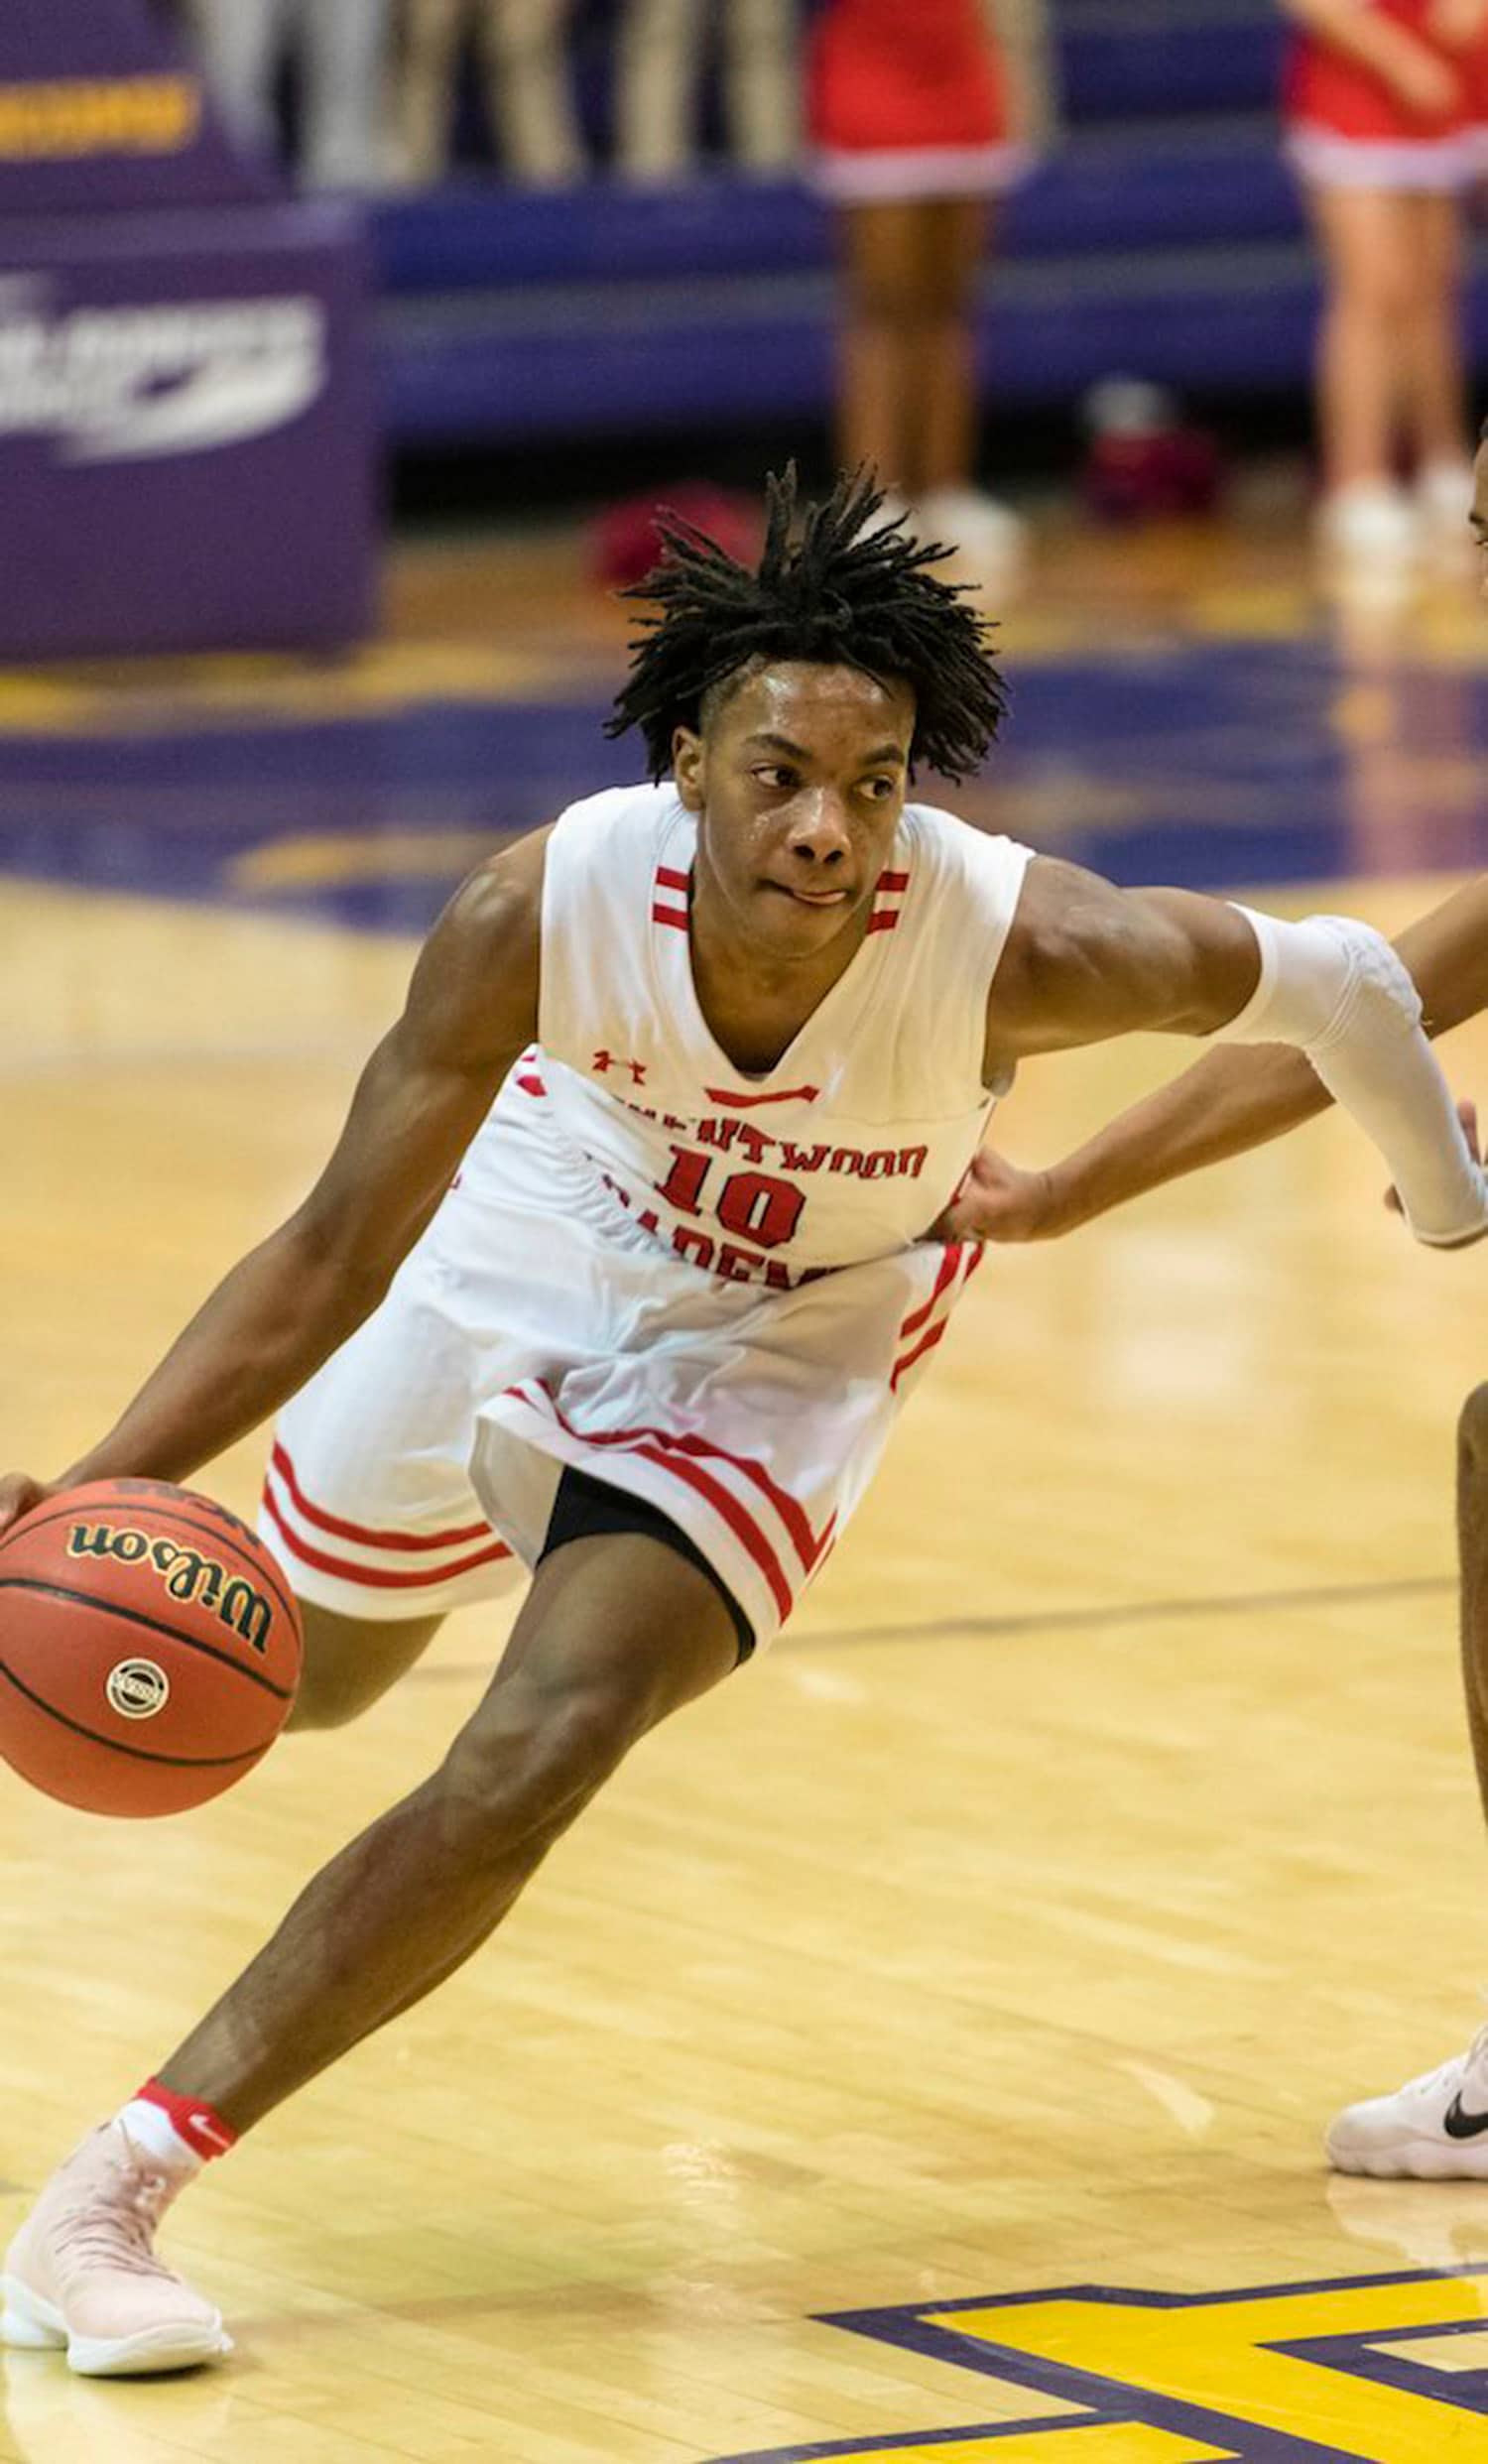 Facts and Stats About Darius Garland